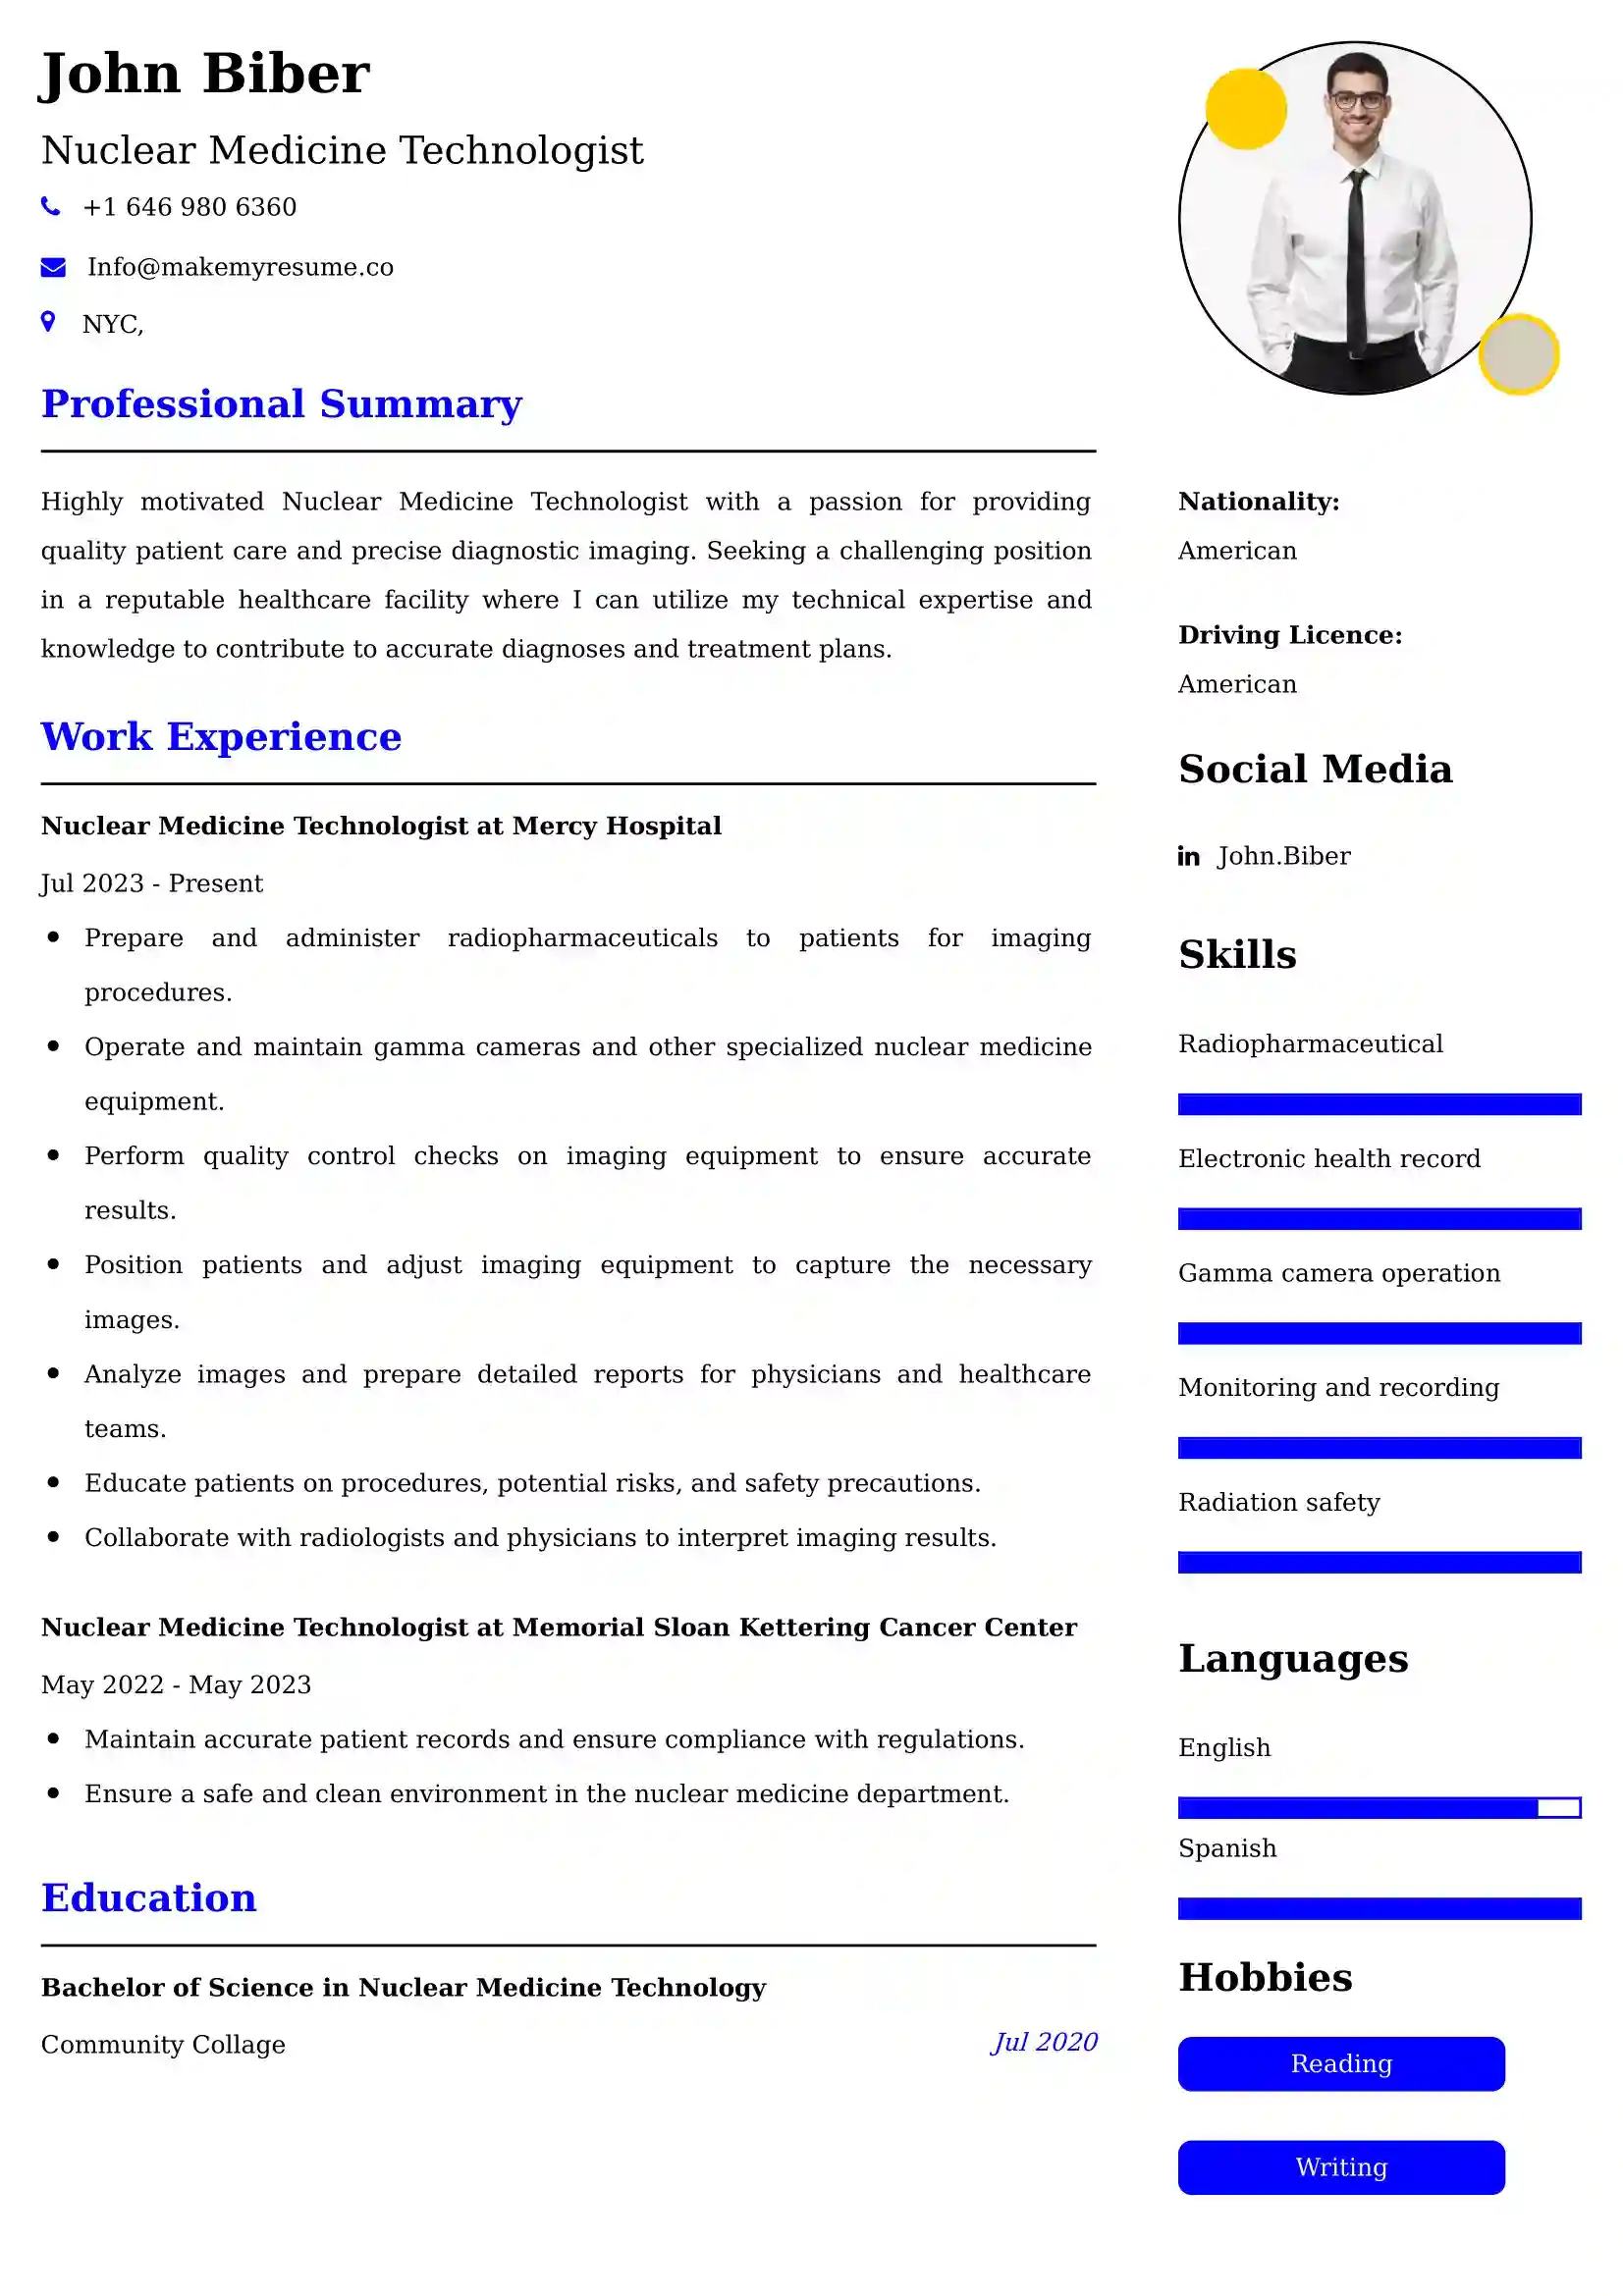 Nuclear Medicine Technologist Resume Examples for UAE